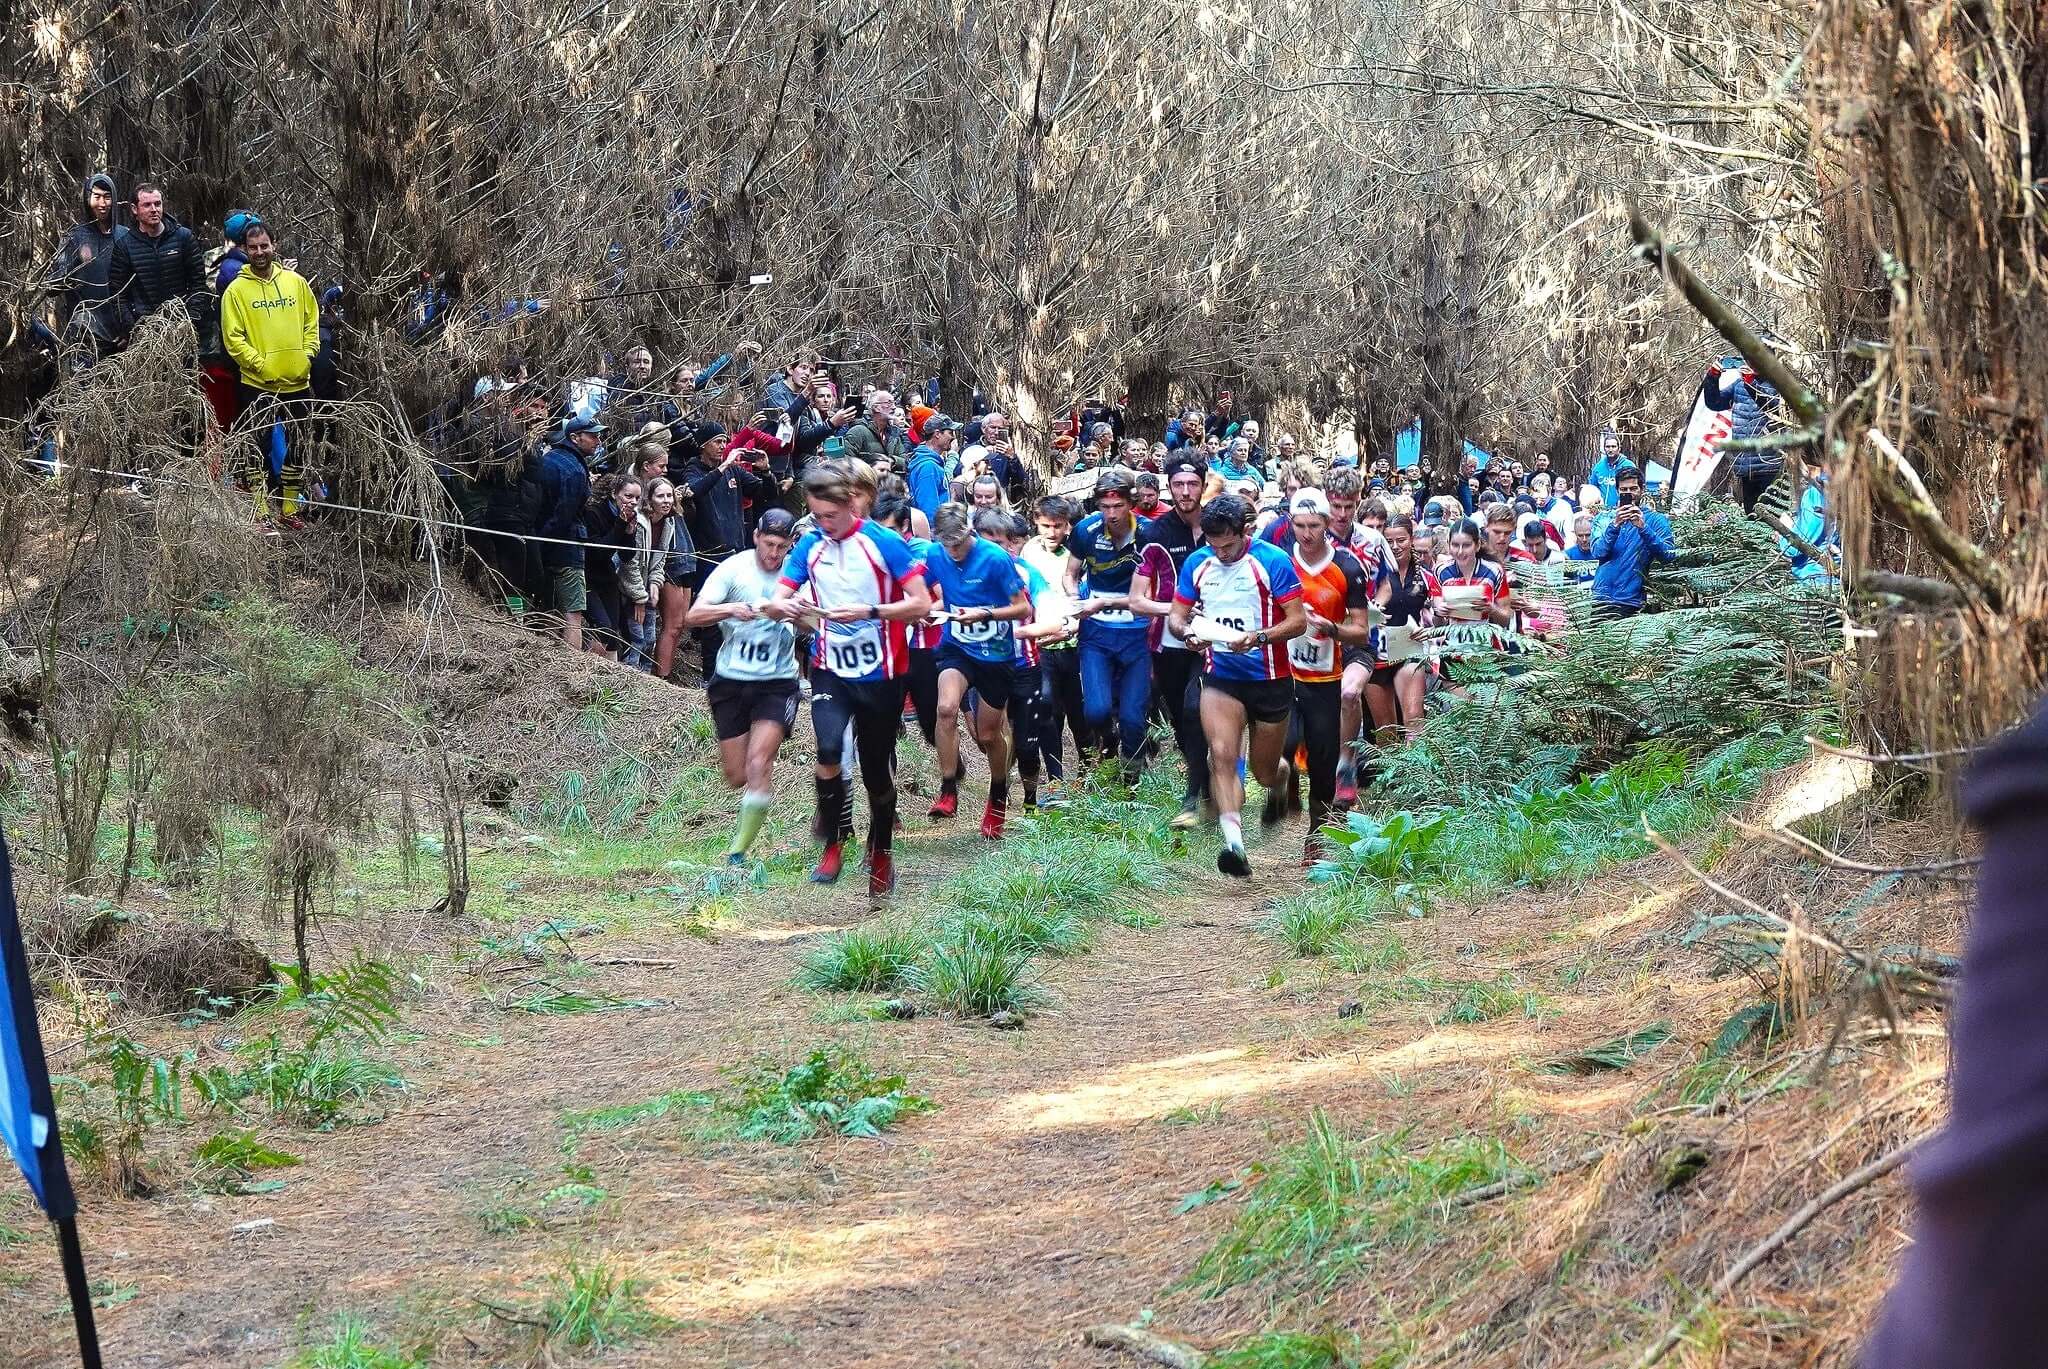 Photo of orienteers starting relay in a forest